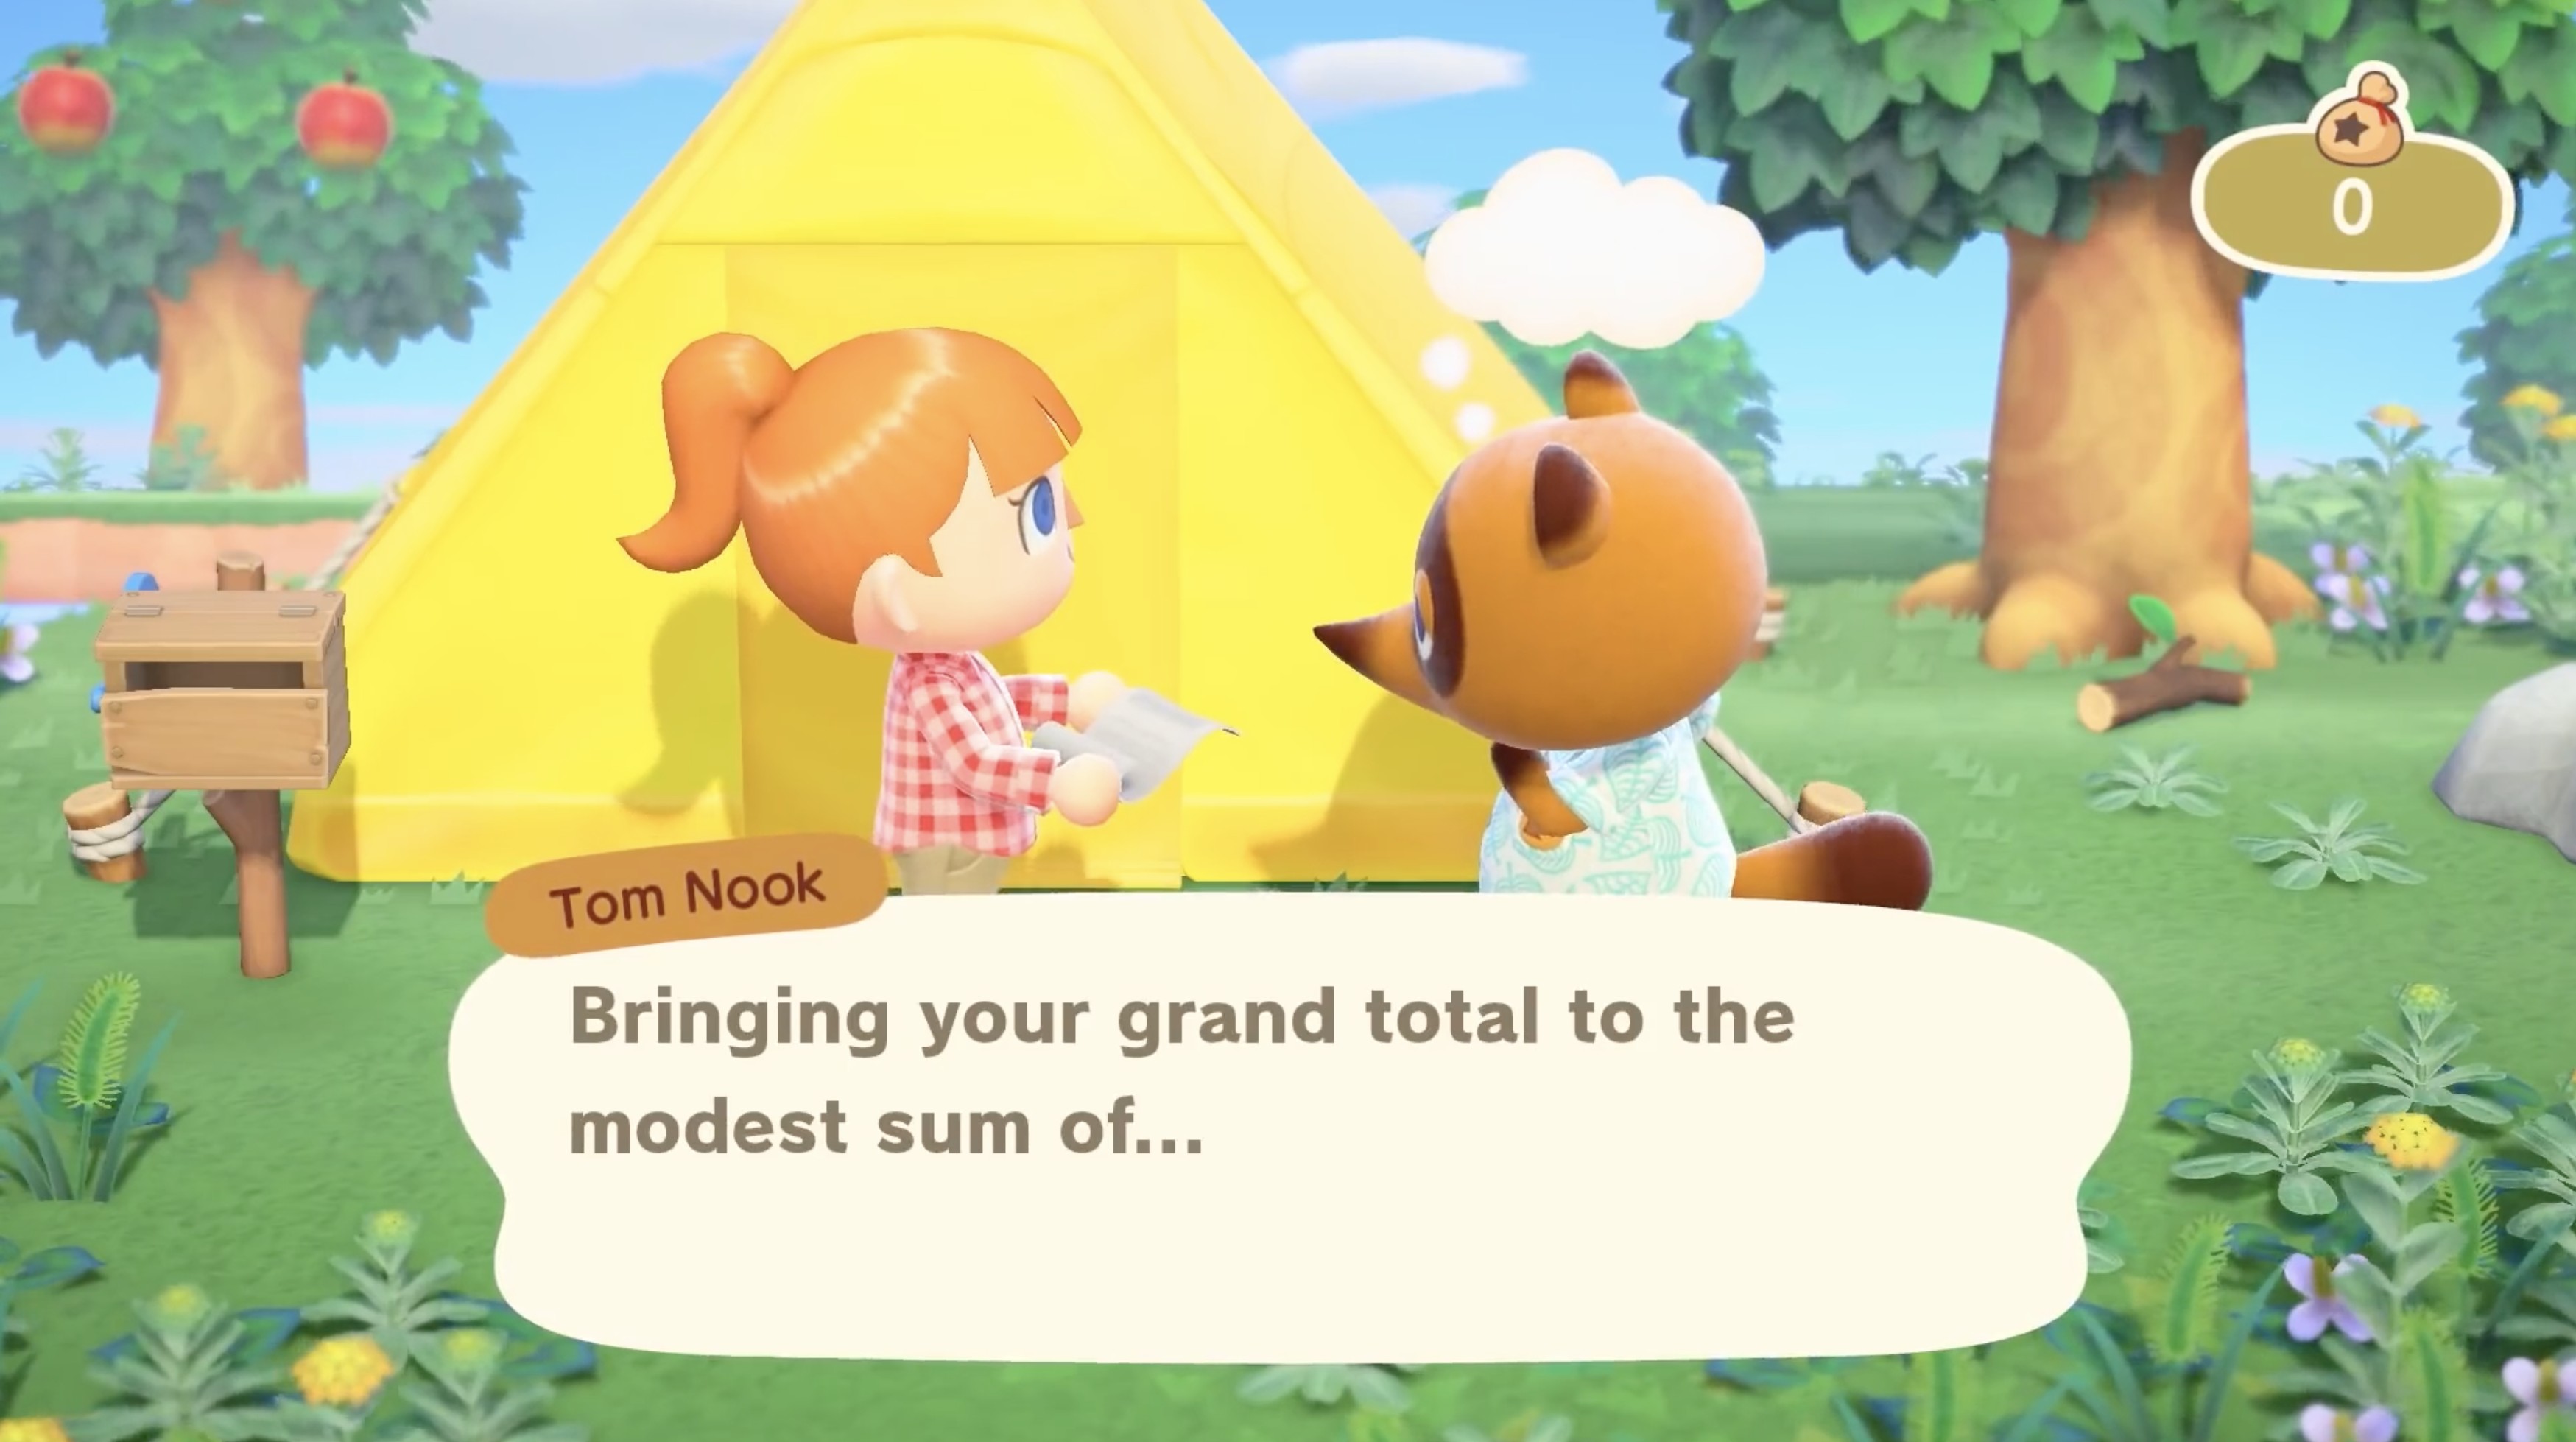 discount on animal crossing